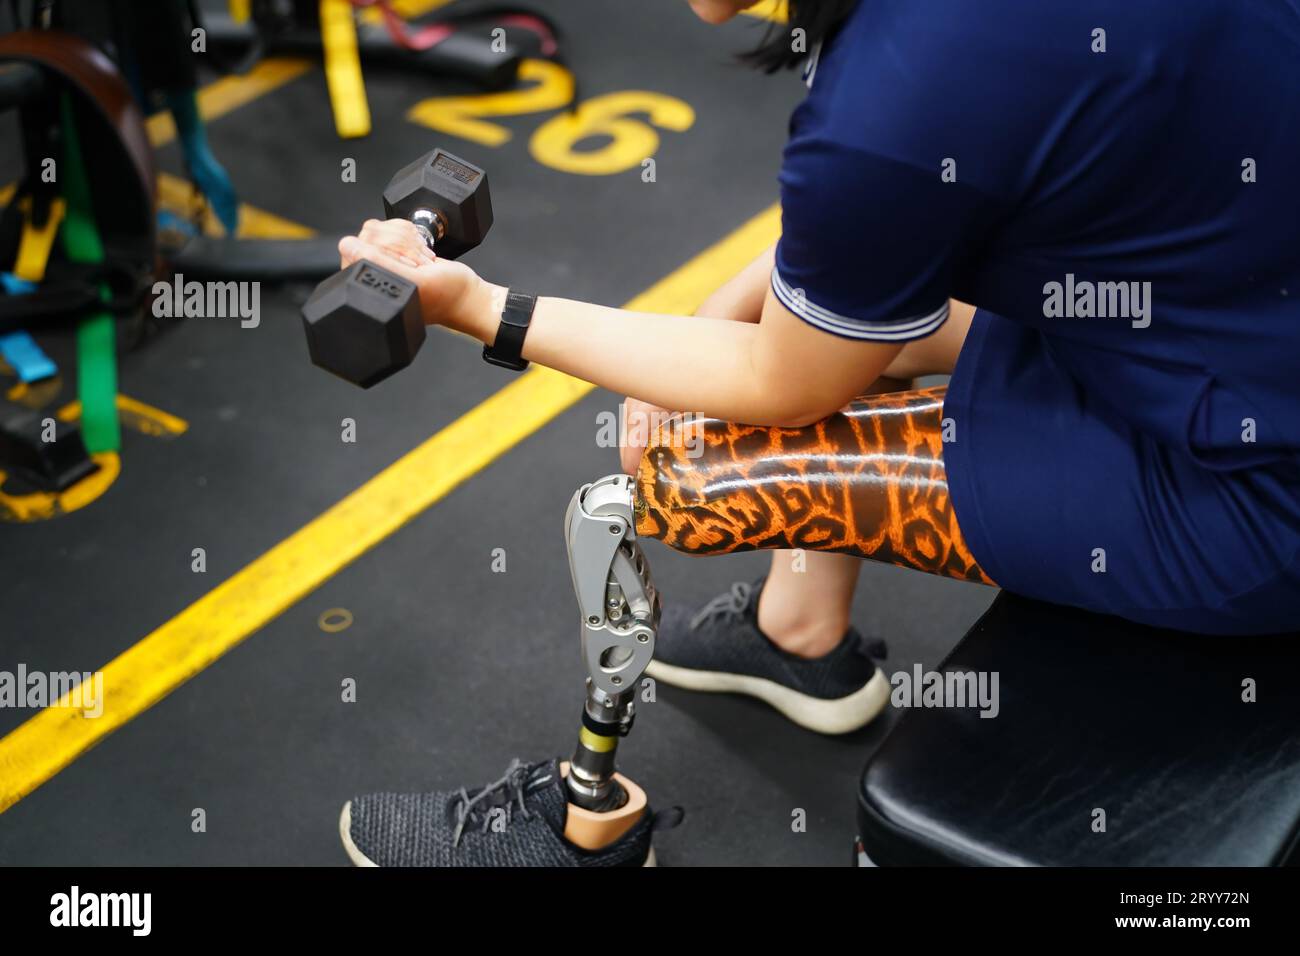 Young female with one prosthetic leg warms up by lifting light weights. Concept of living a woman's life with a prosthetic limb. Stock Photo